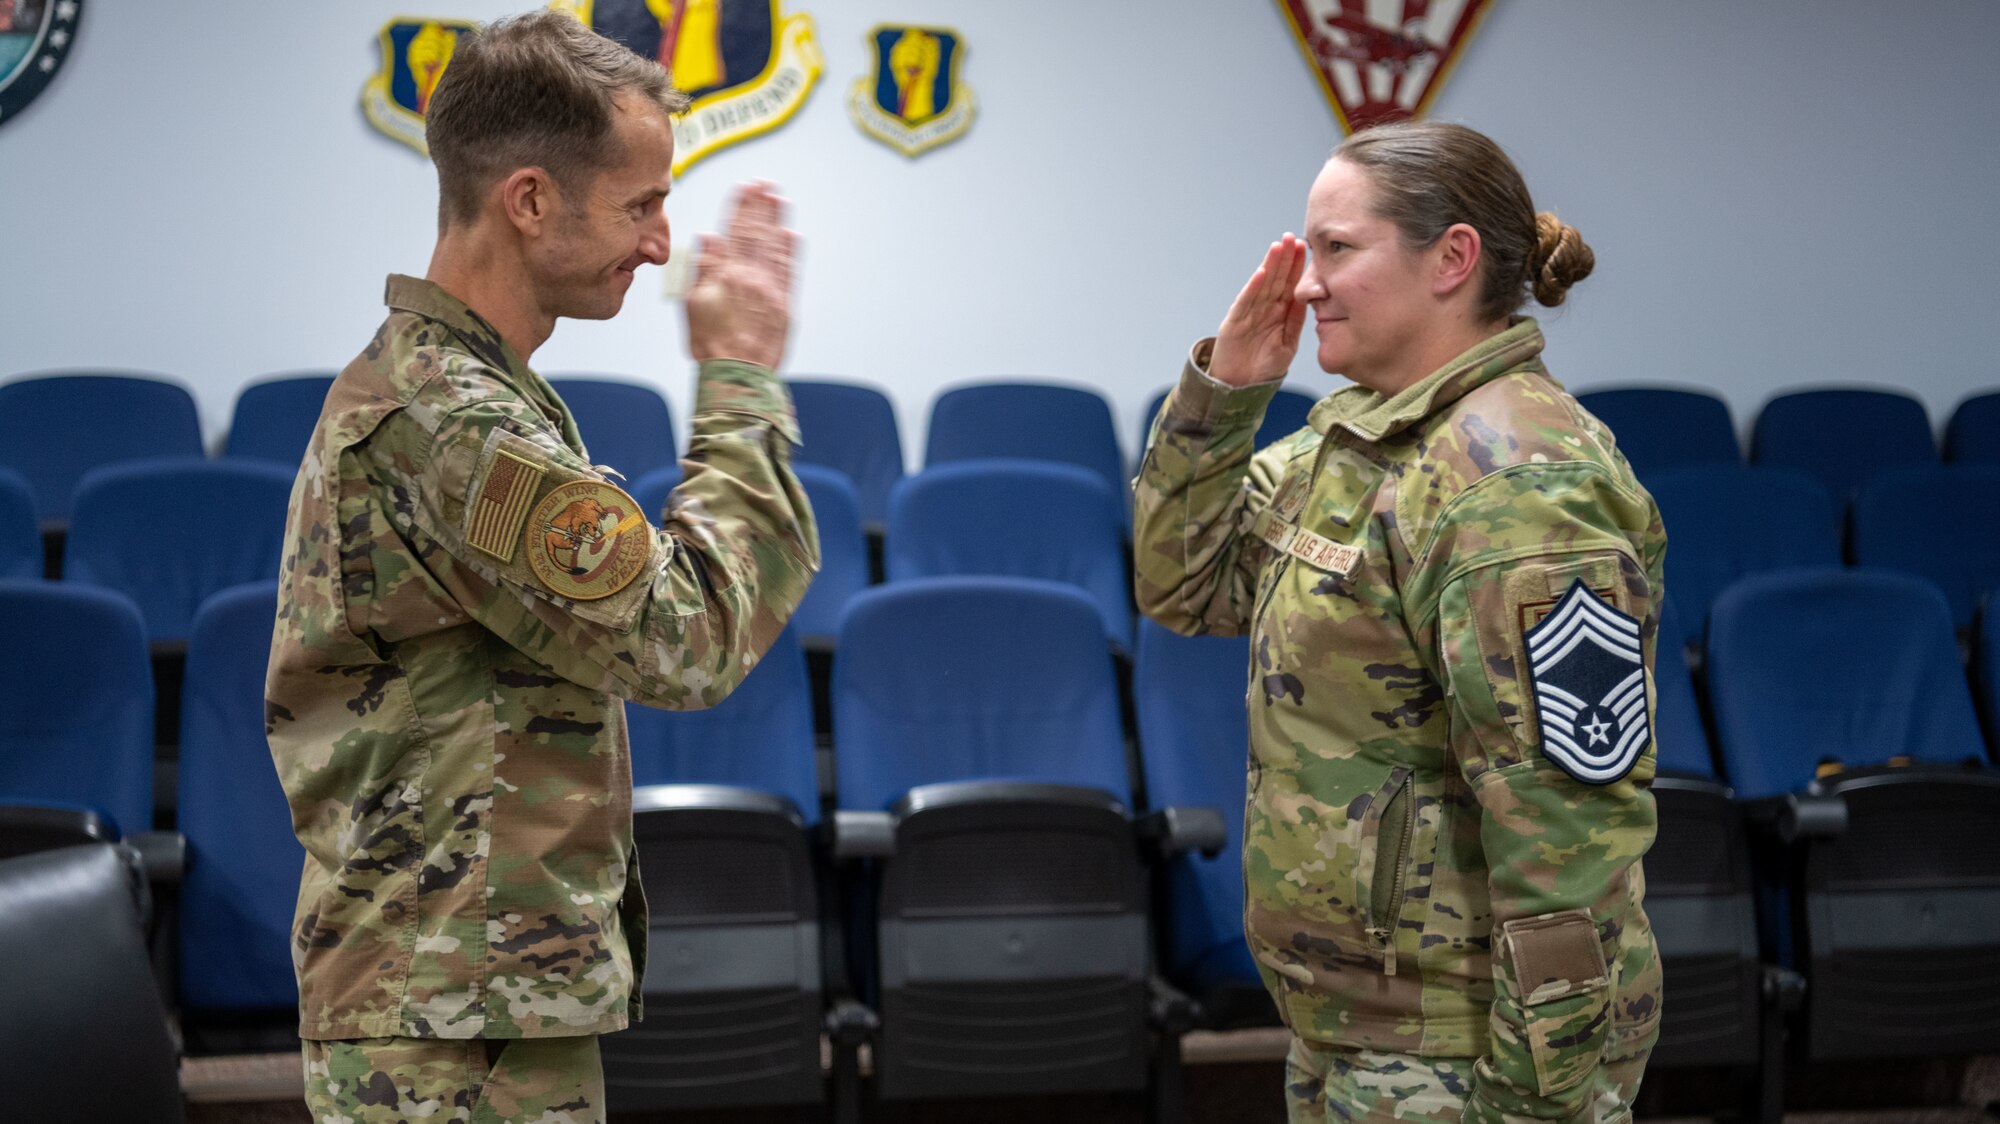 U.S. Air Force Senior Master Sgt. Diana Rogers, 35th Civil Engineer Squadron explosive ordnance disposal superintendent, salutes Col. Michael Richard, 35th Fighter Wing commander, during a chief master sergeant release ceremony at Misawa Air Base, Dec. 1, 2022. Air Force officials selected 514 senior master sergeants for promotion to chief master sergeant for the 22E9 promotion cycle. (U.S. Air Force photo by Staff Sgt. Kristen Heller)